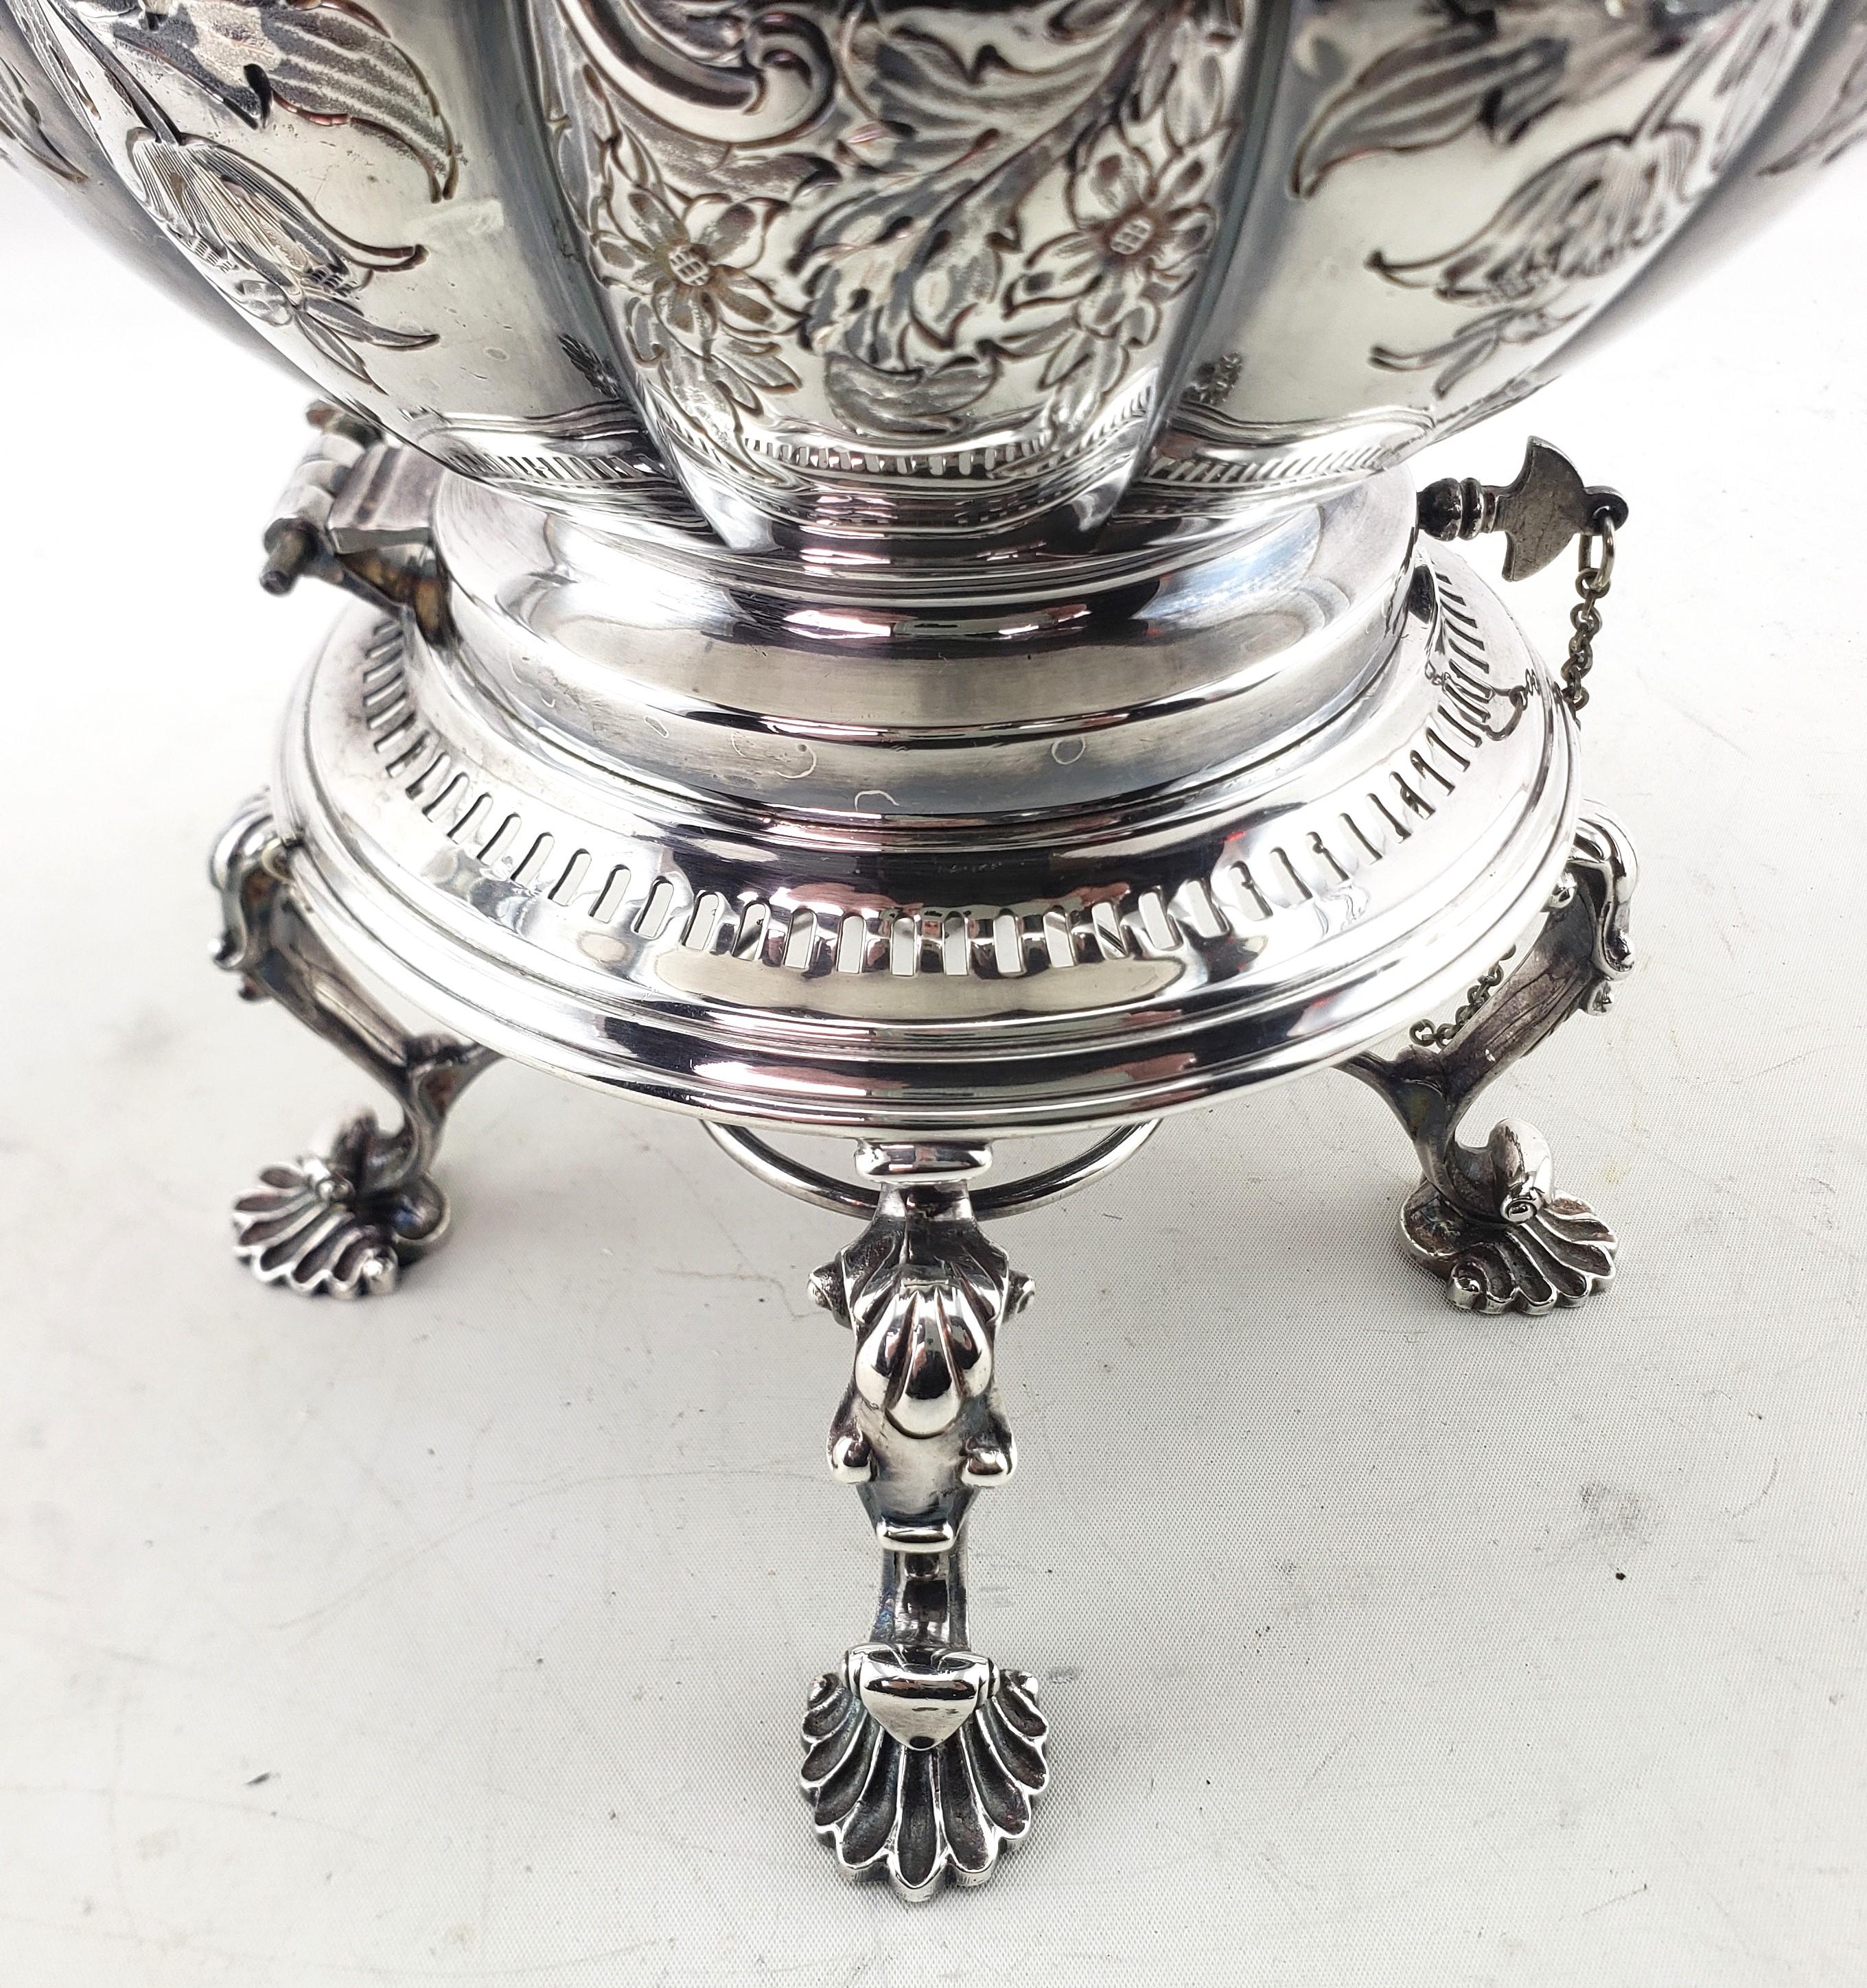 Antique English Silver Plated Tipping Hot Water Kettle with Chased Floral Motif For Sale 7